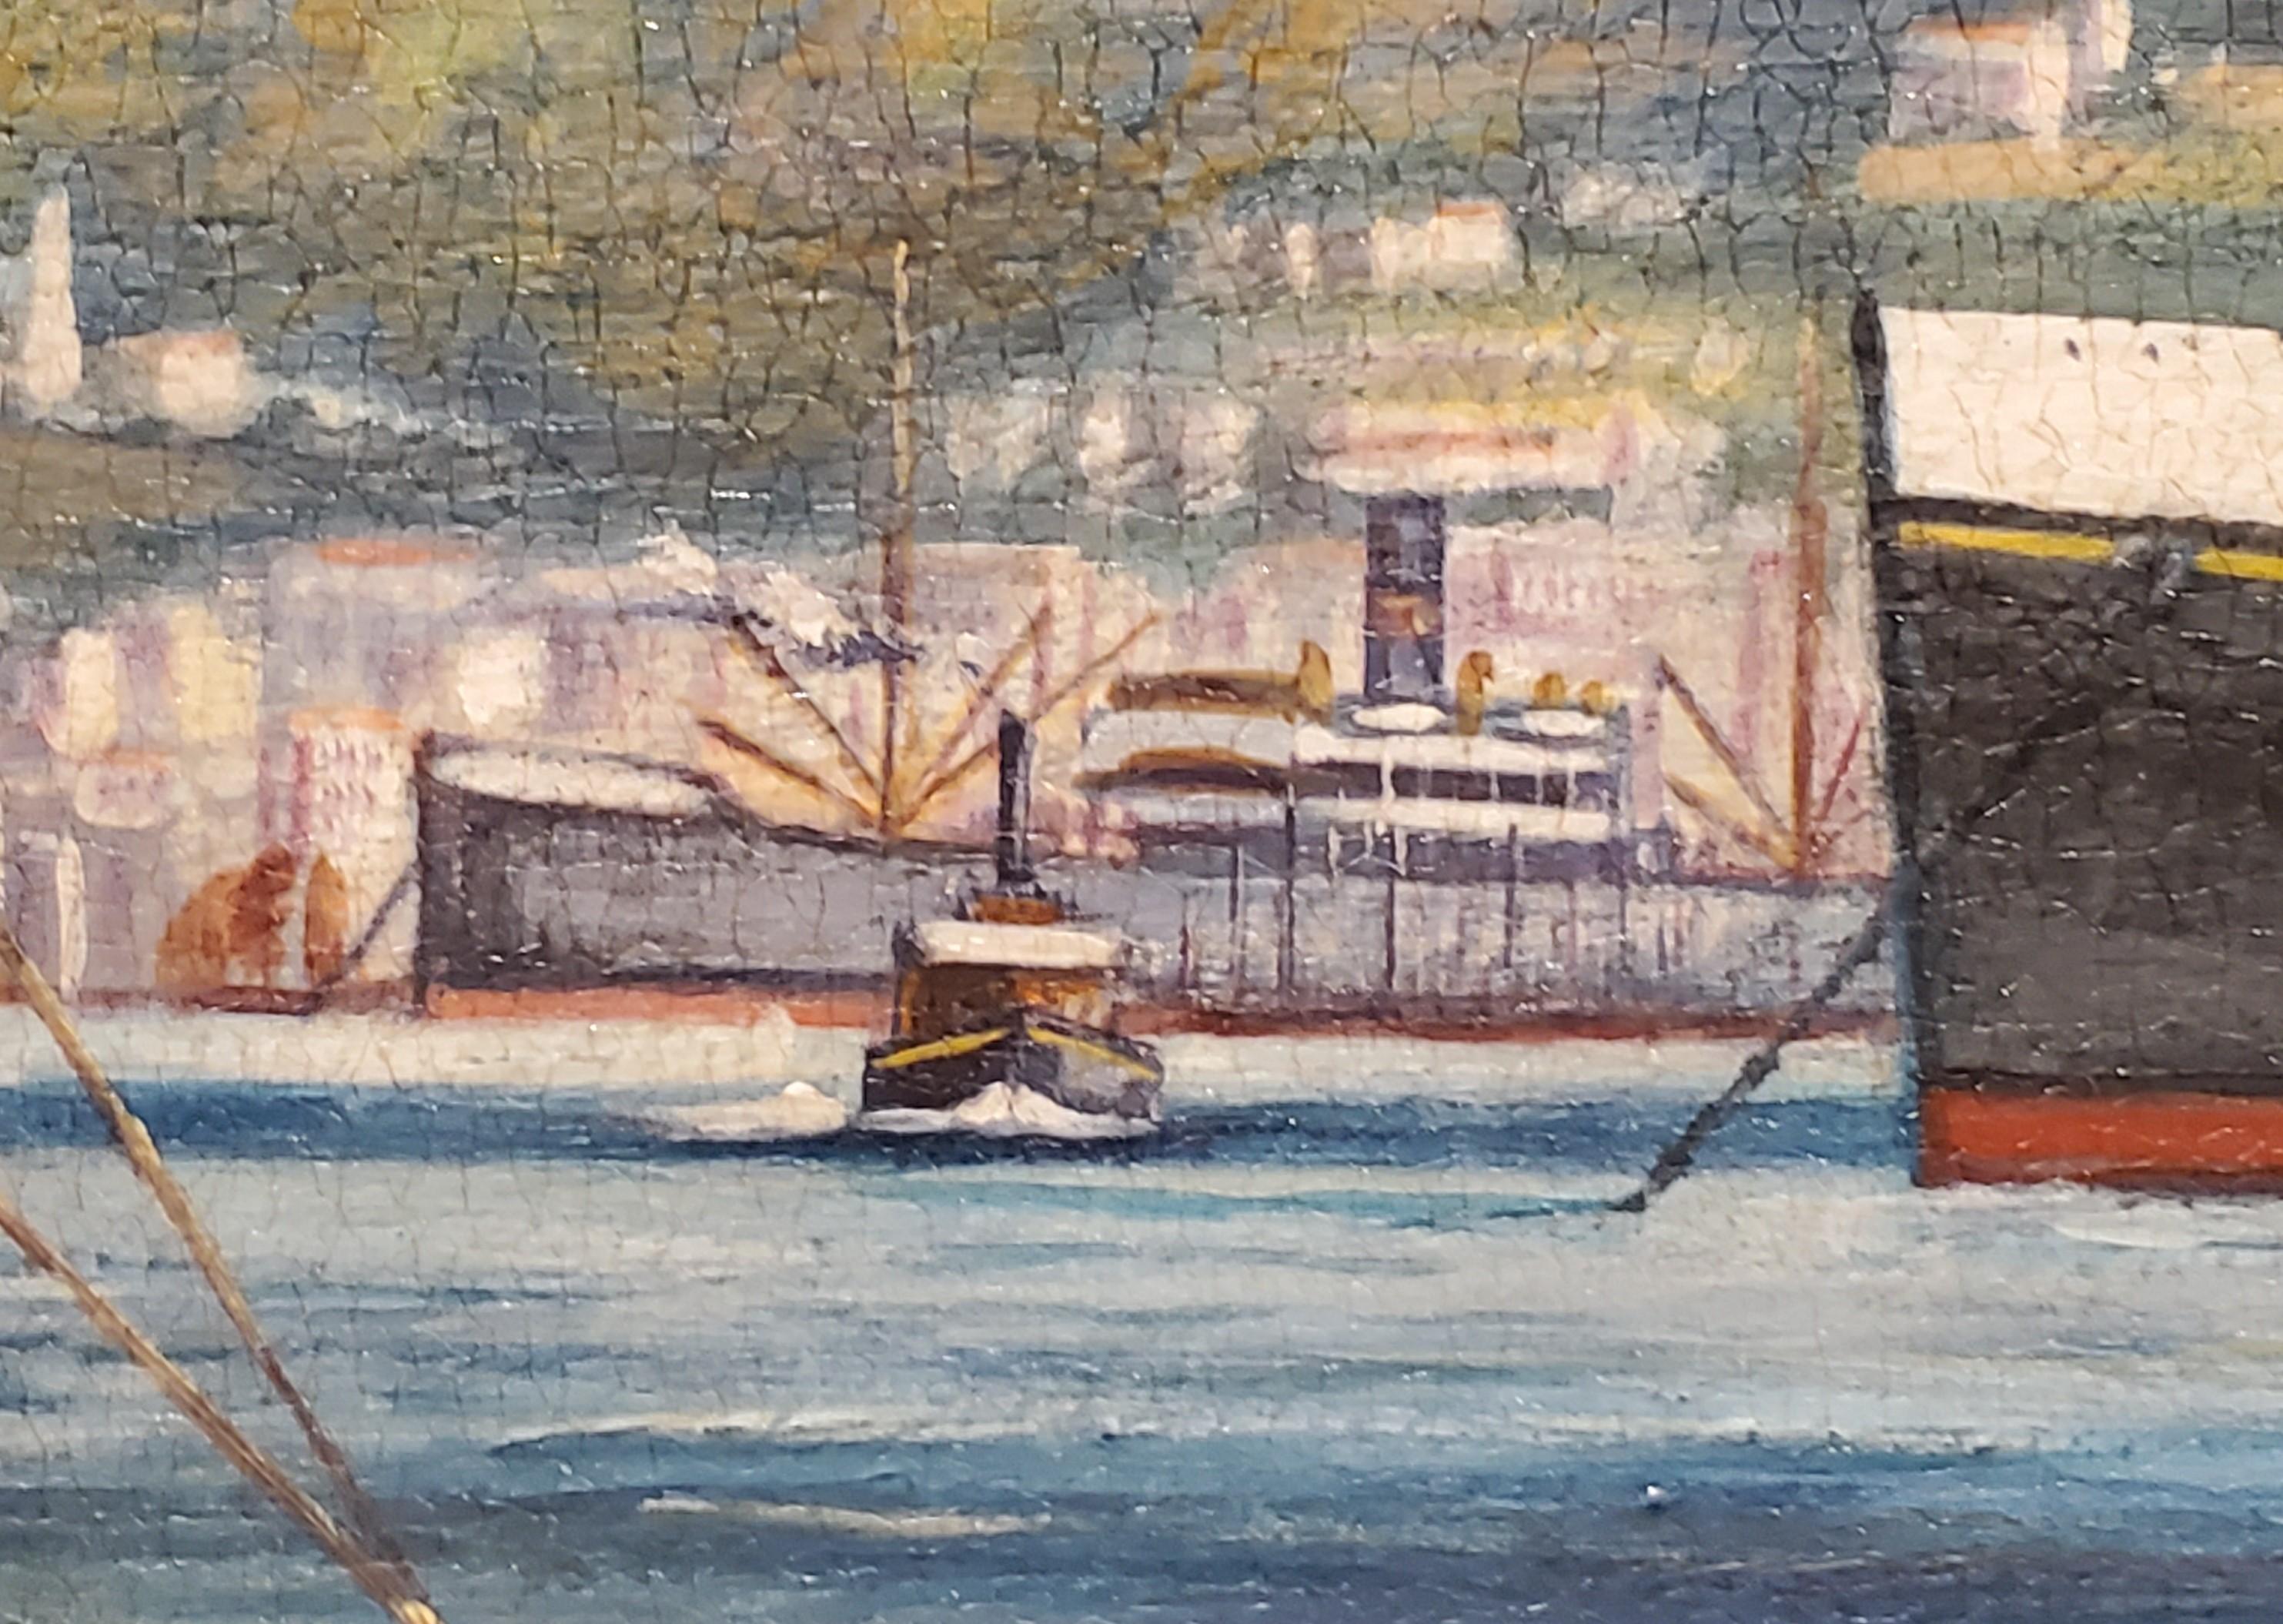 Sea Plane Chinese Clipper Steam Liner At Chinese Harbor by T. G. Pollard 2